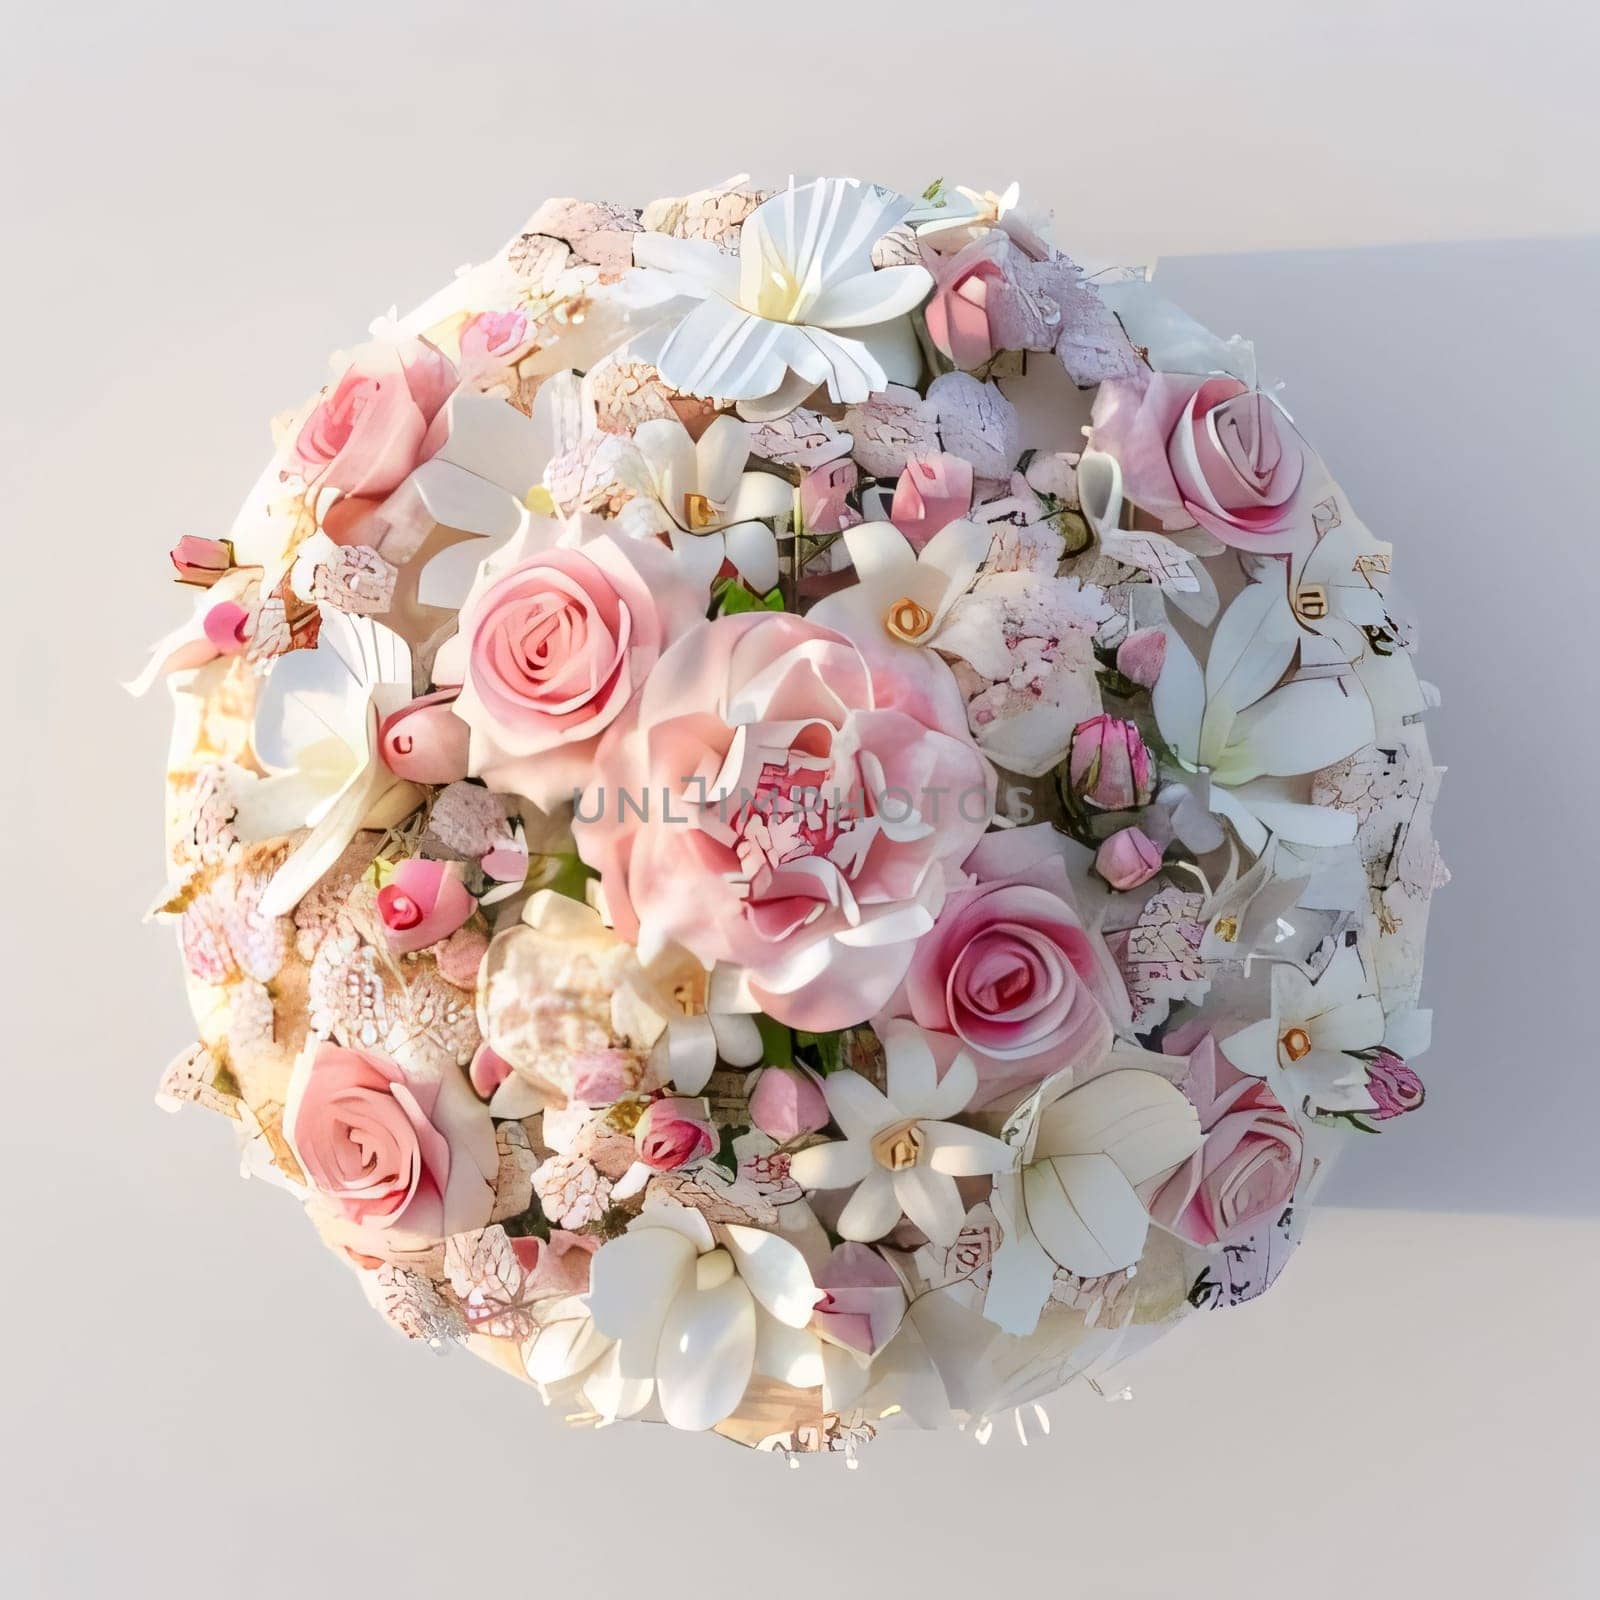 An aerial view of a wedding pink and white bouquet of flowers. Flowering flowers, a symbol of spring, new life. by ThemesS